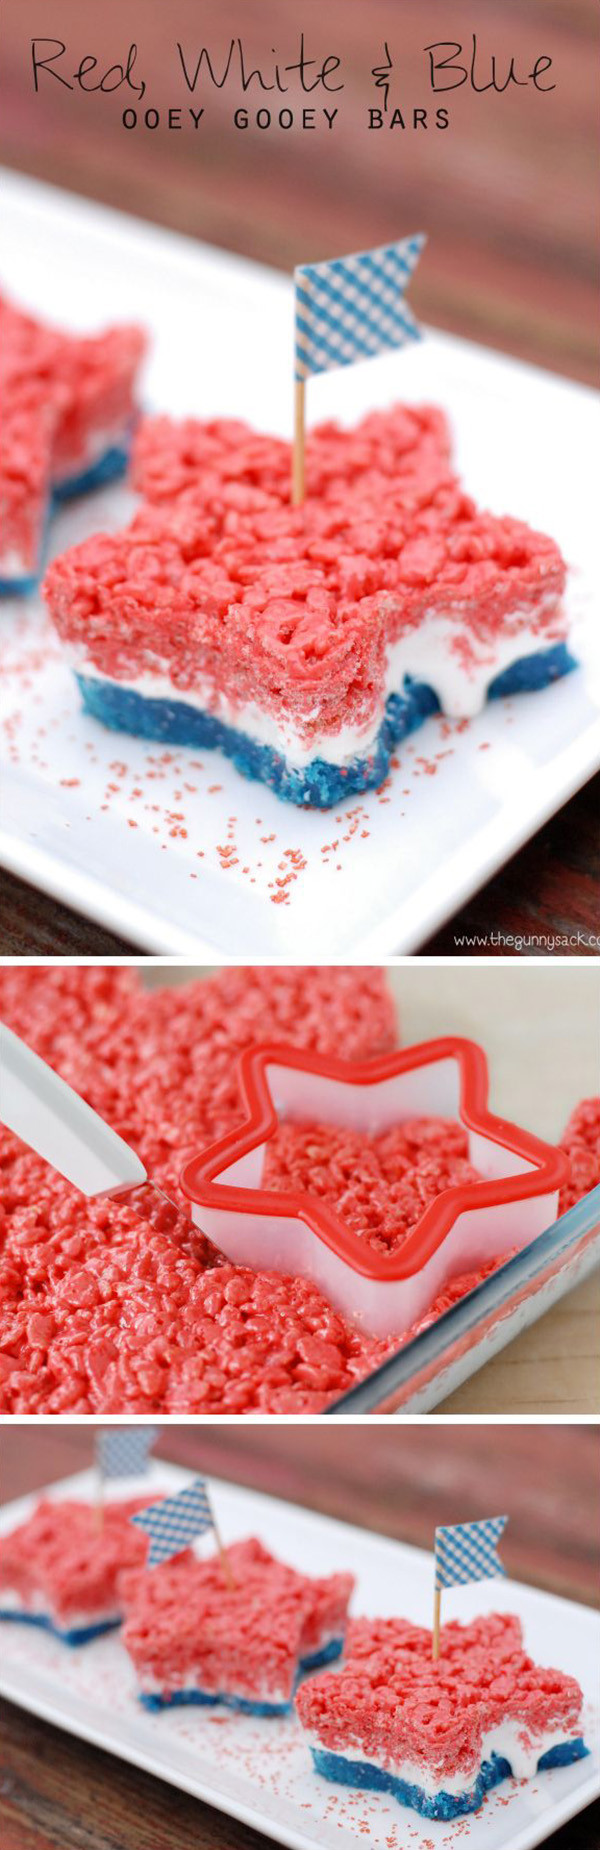 4th Of July Themed Food
 12 Best Recipes for the 4th of July Themed Weddings and